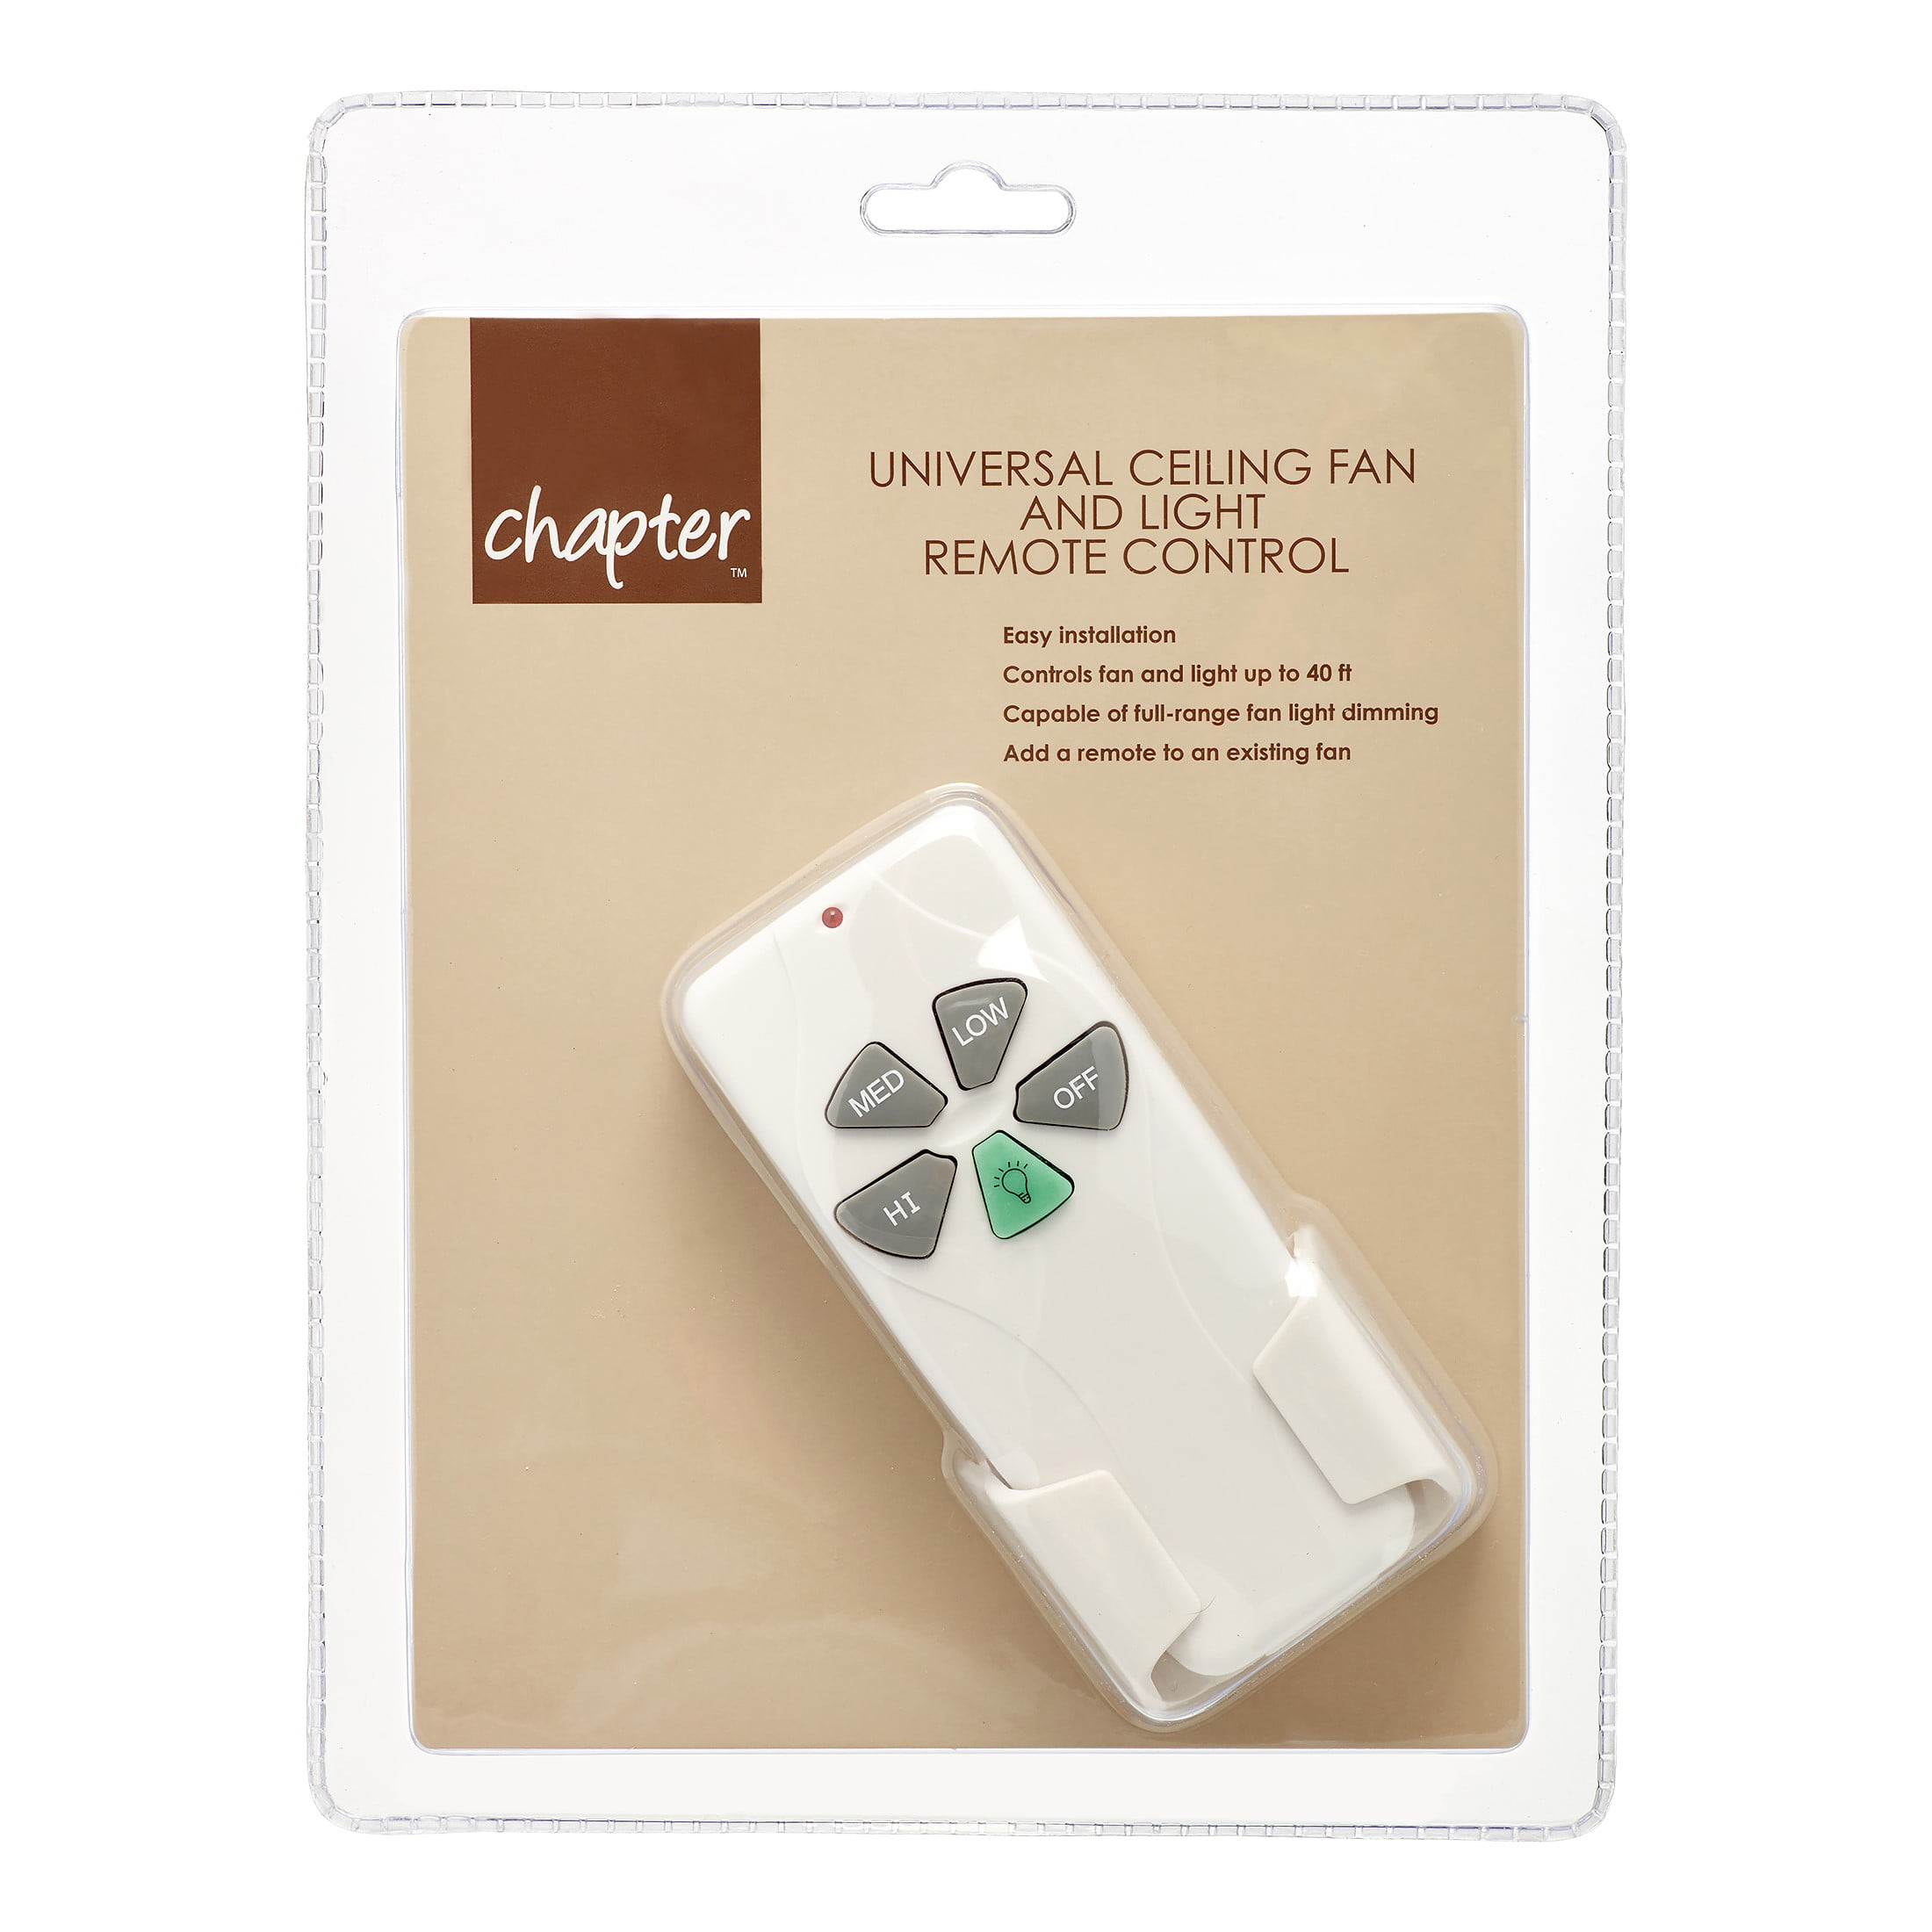 Chapter Universal Ceiling Fan And Light Remote Control Com - Is There A Universal Ceiling Fan Remote